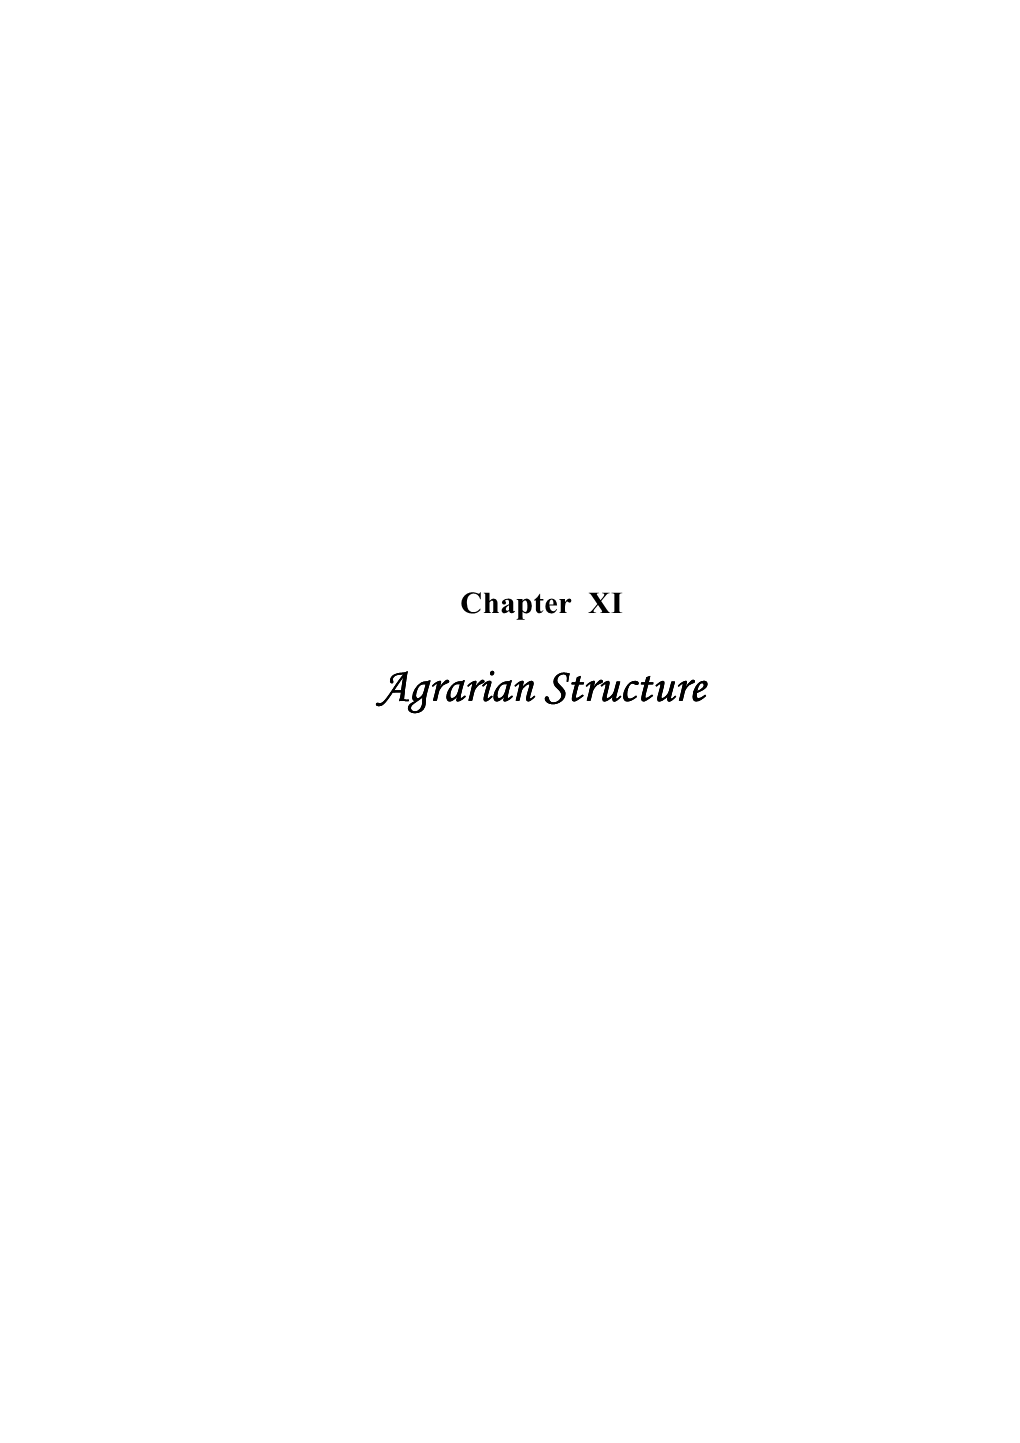 Agrarian Structure of Mughals